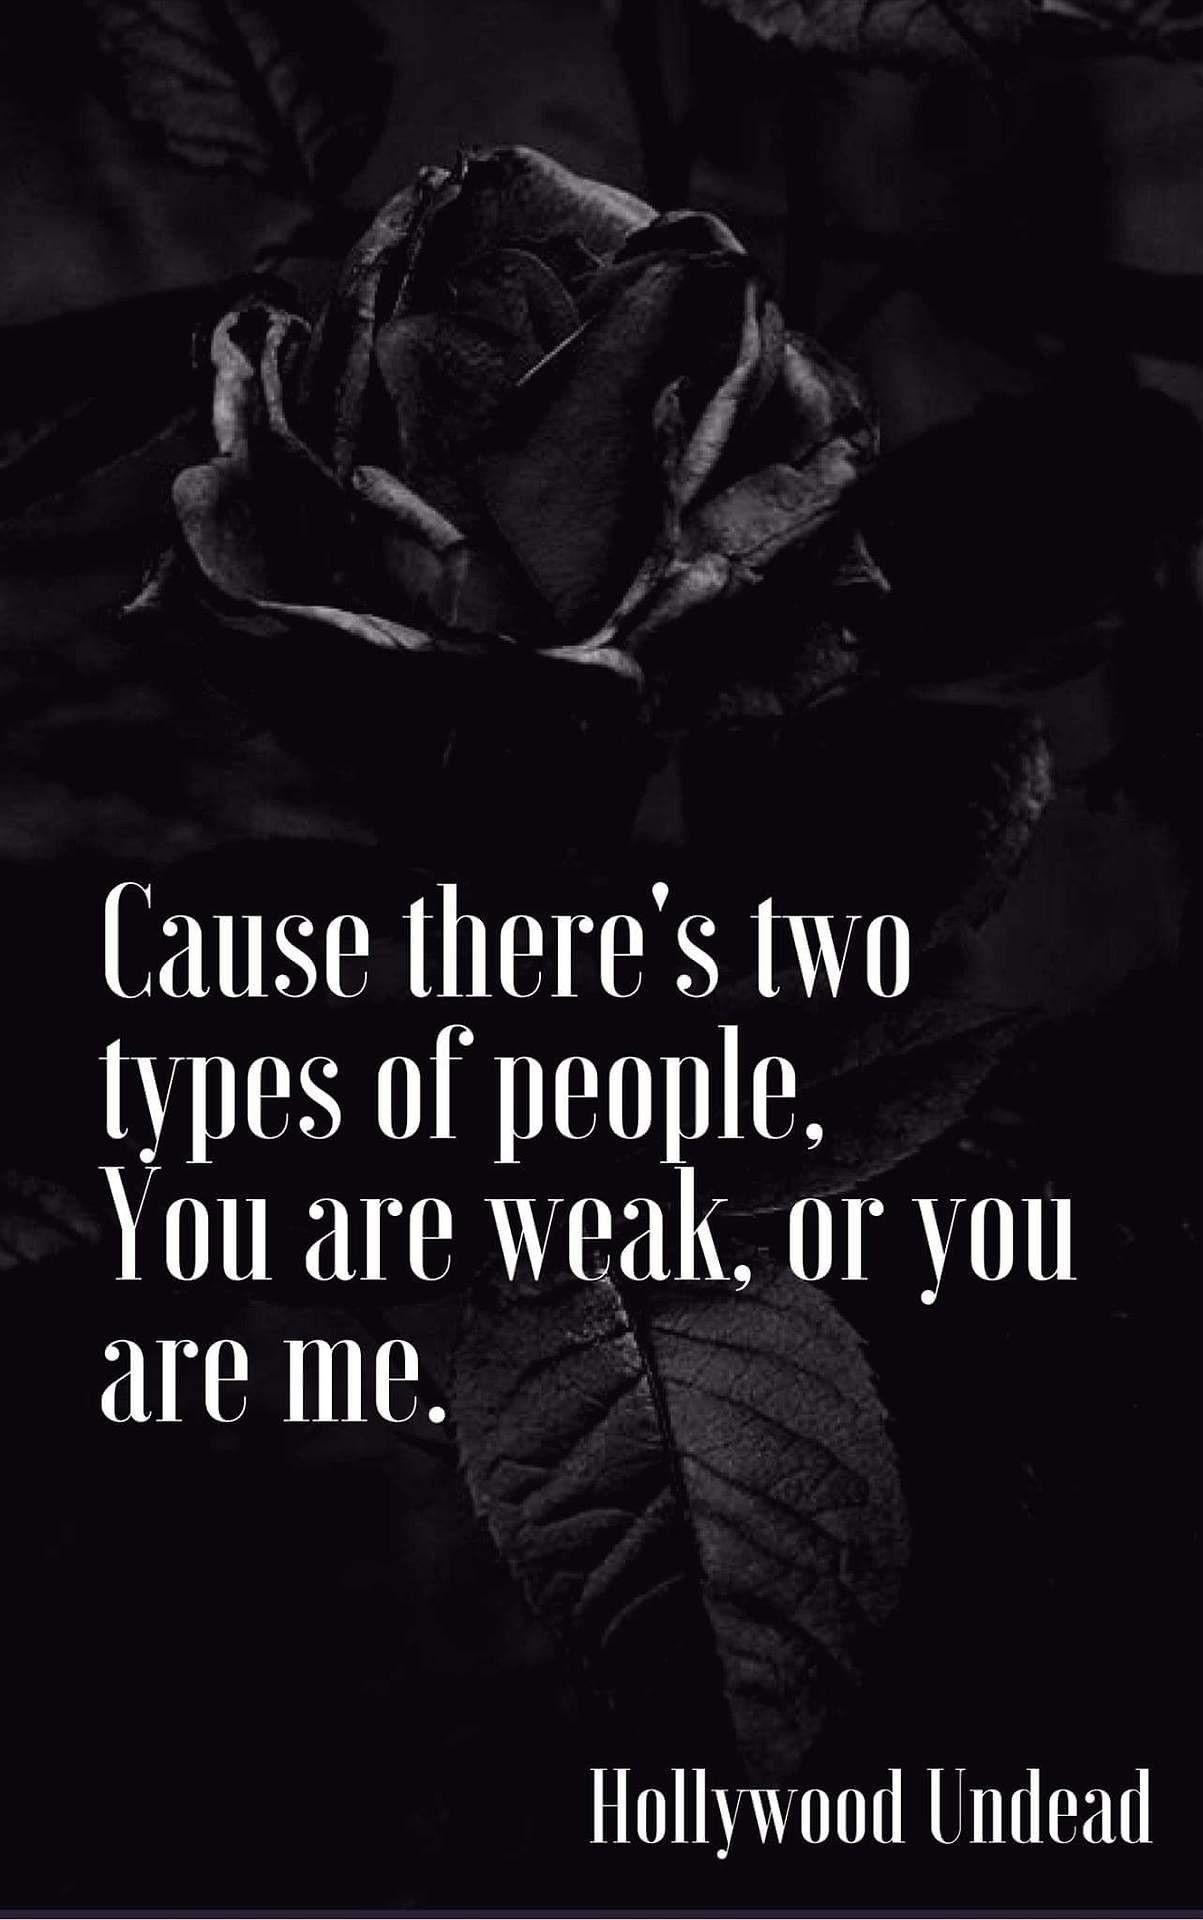 1203x1920 hollywood undead hollywood undead lyrics my edit types of people weak you  are weak you are